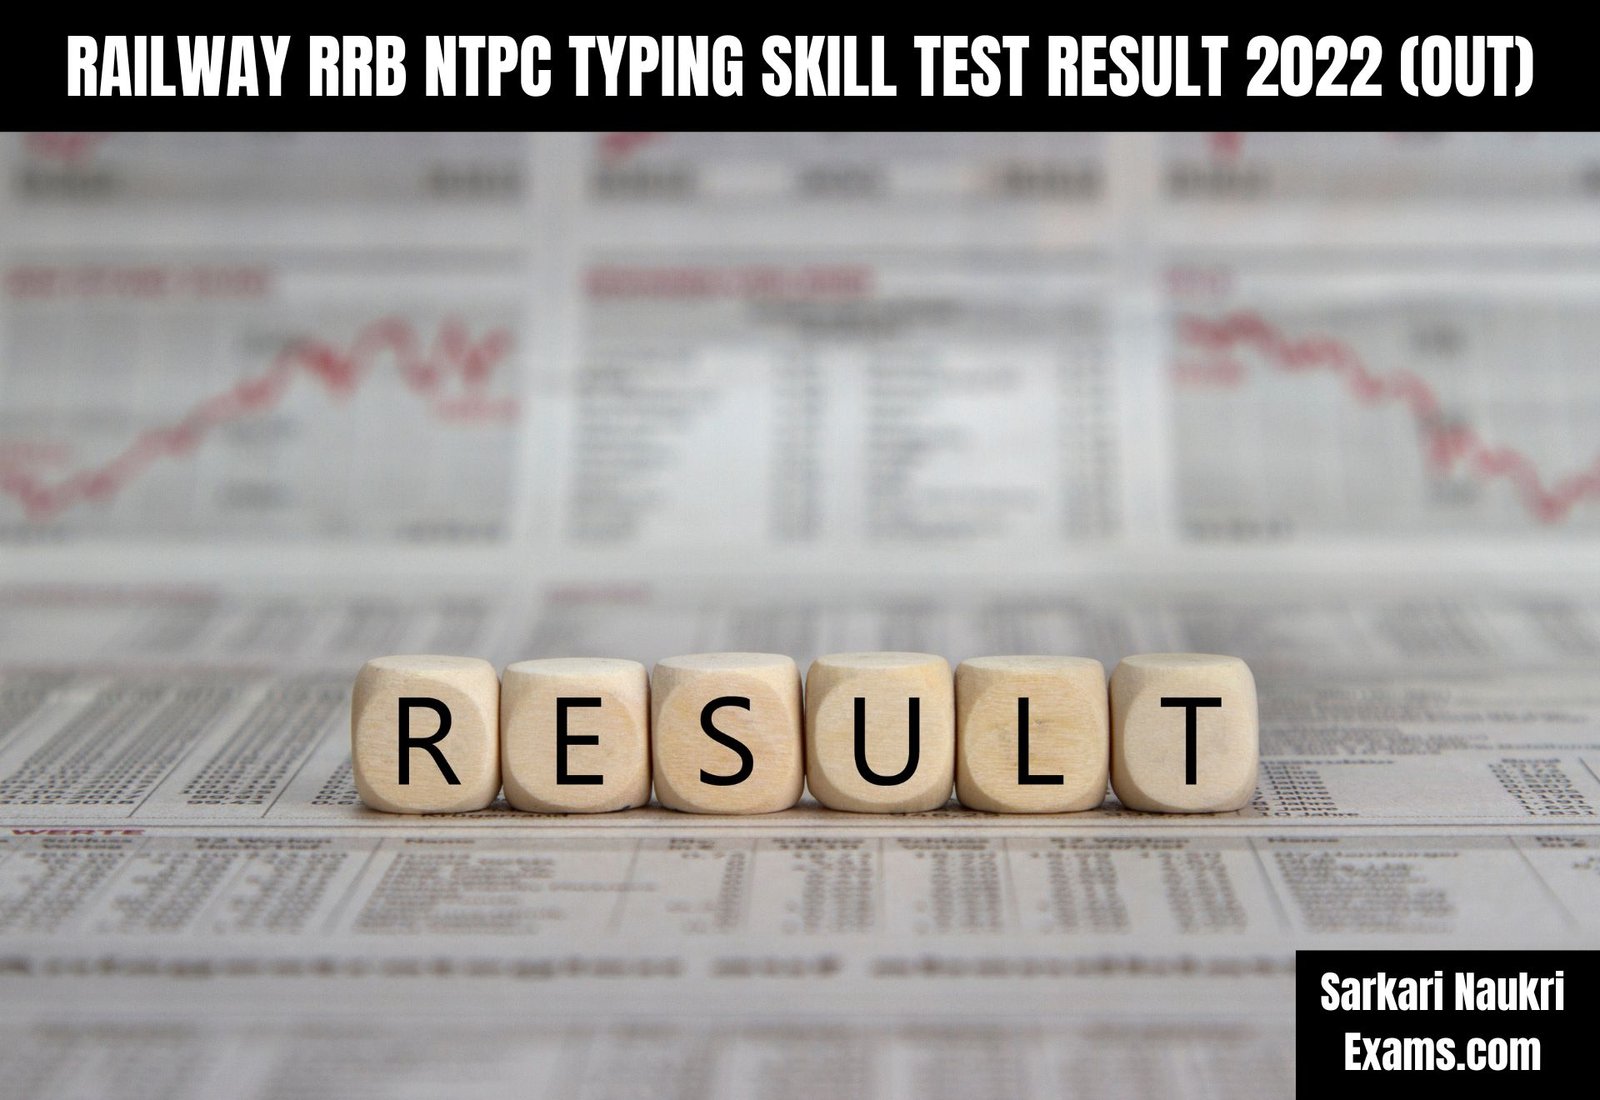 Railway RRB NTPC Typing Skill Test Result 2022 (OUT) | Download Link, Cut Off